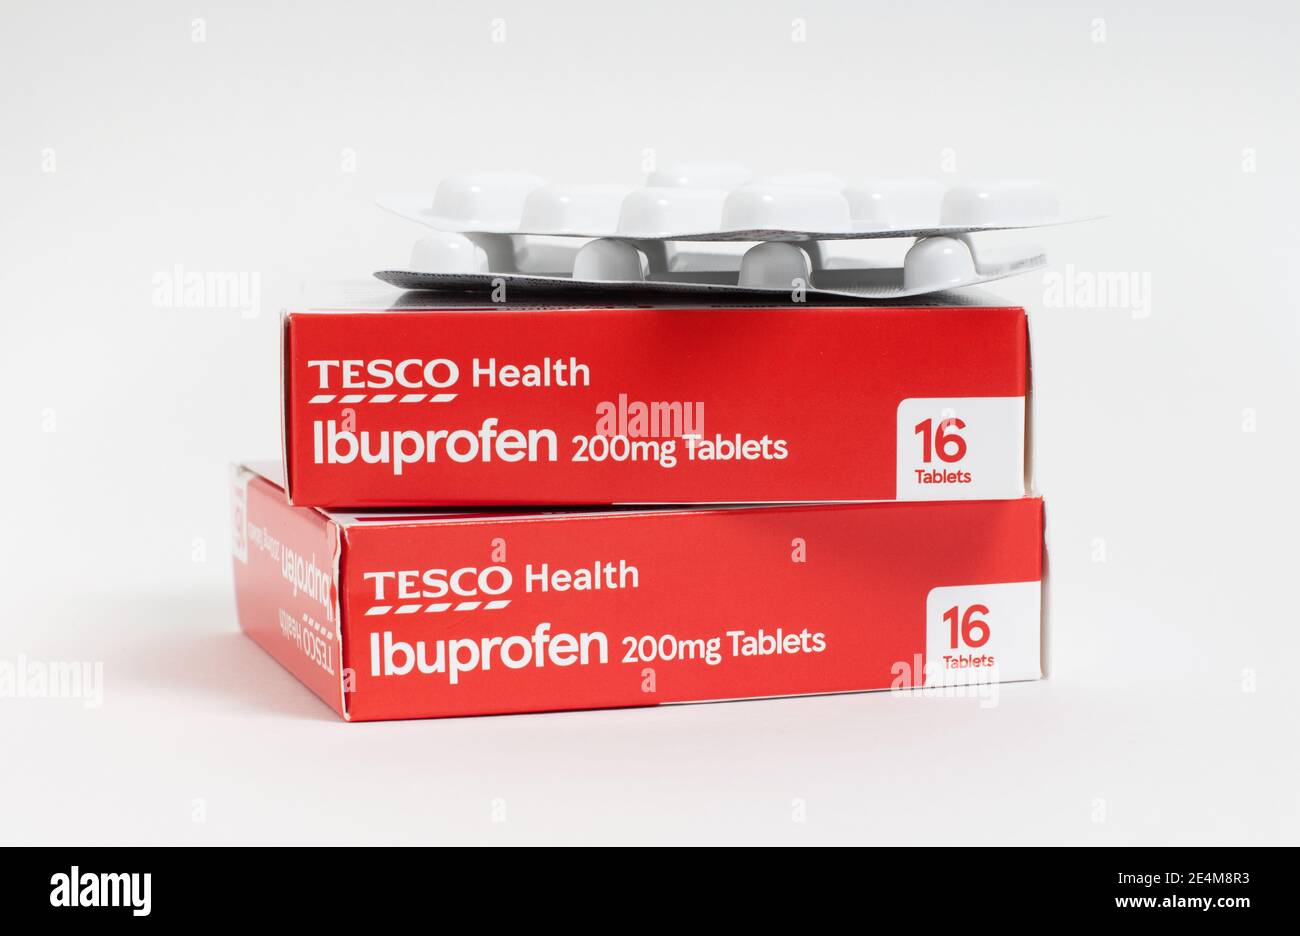 London / UK - January 23rd 2021 - Ibuprofen packets from Tesco supermarket, stacked against a white background Stock Photo